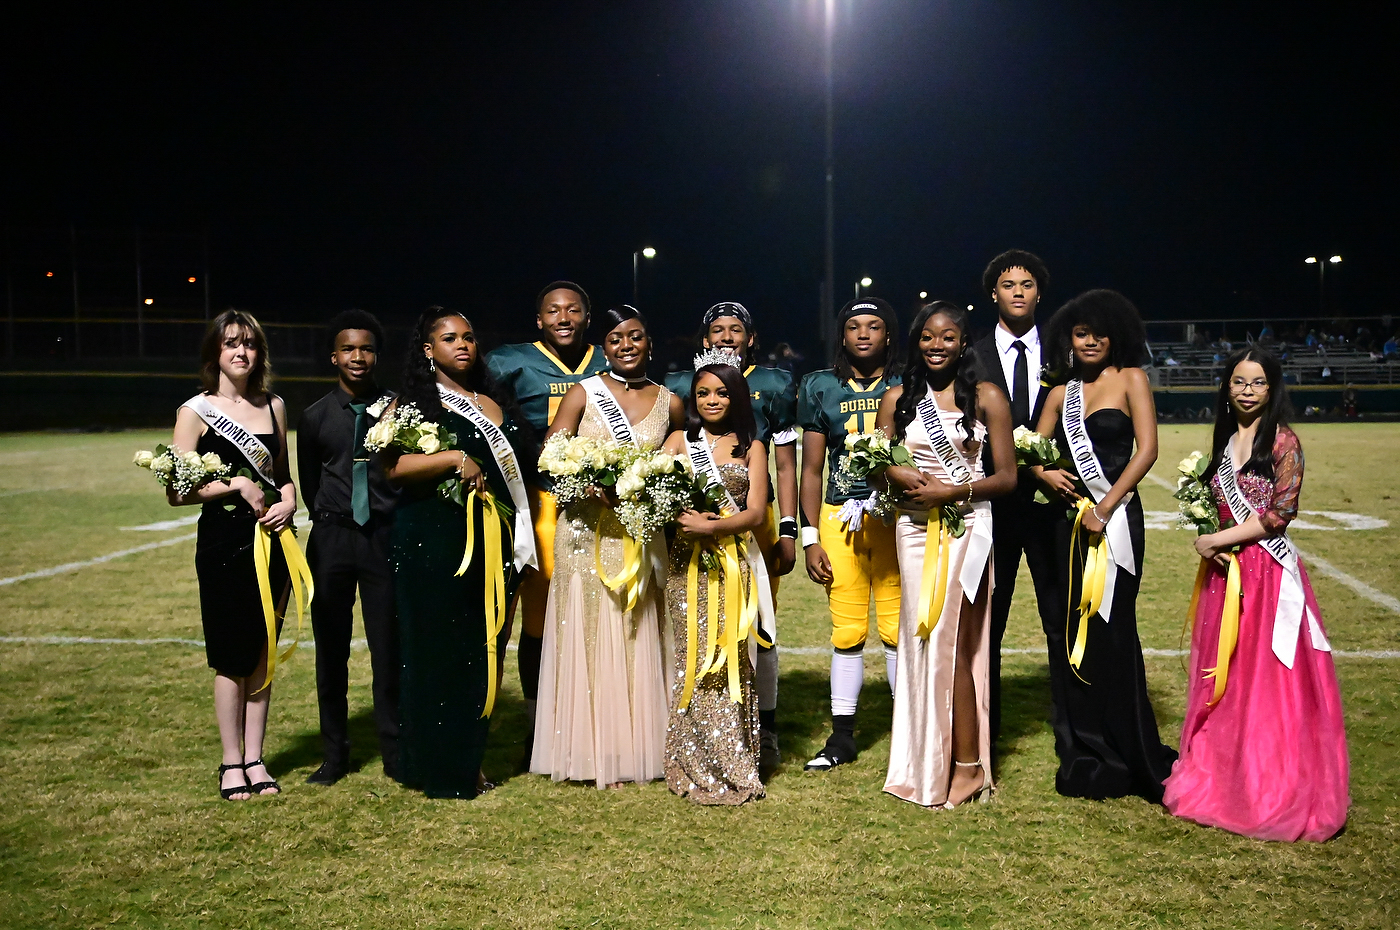 Hilllsboro High School Homecoming Photos and more